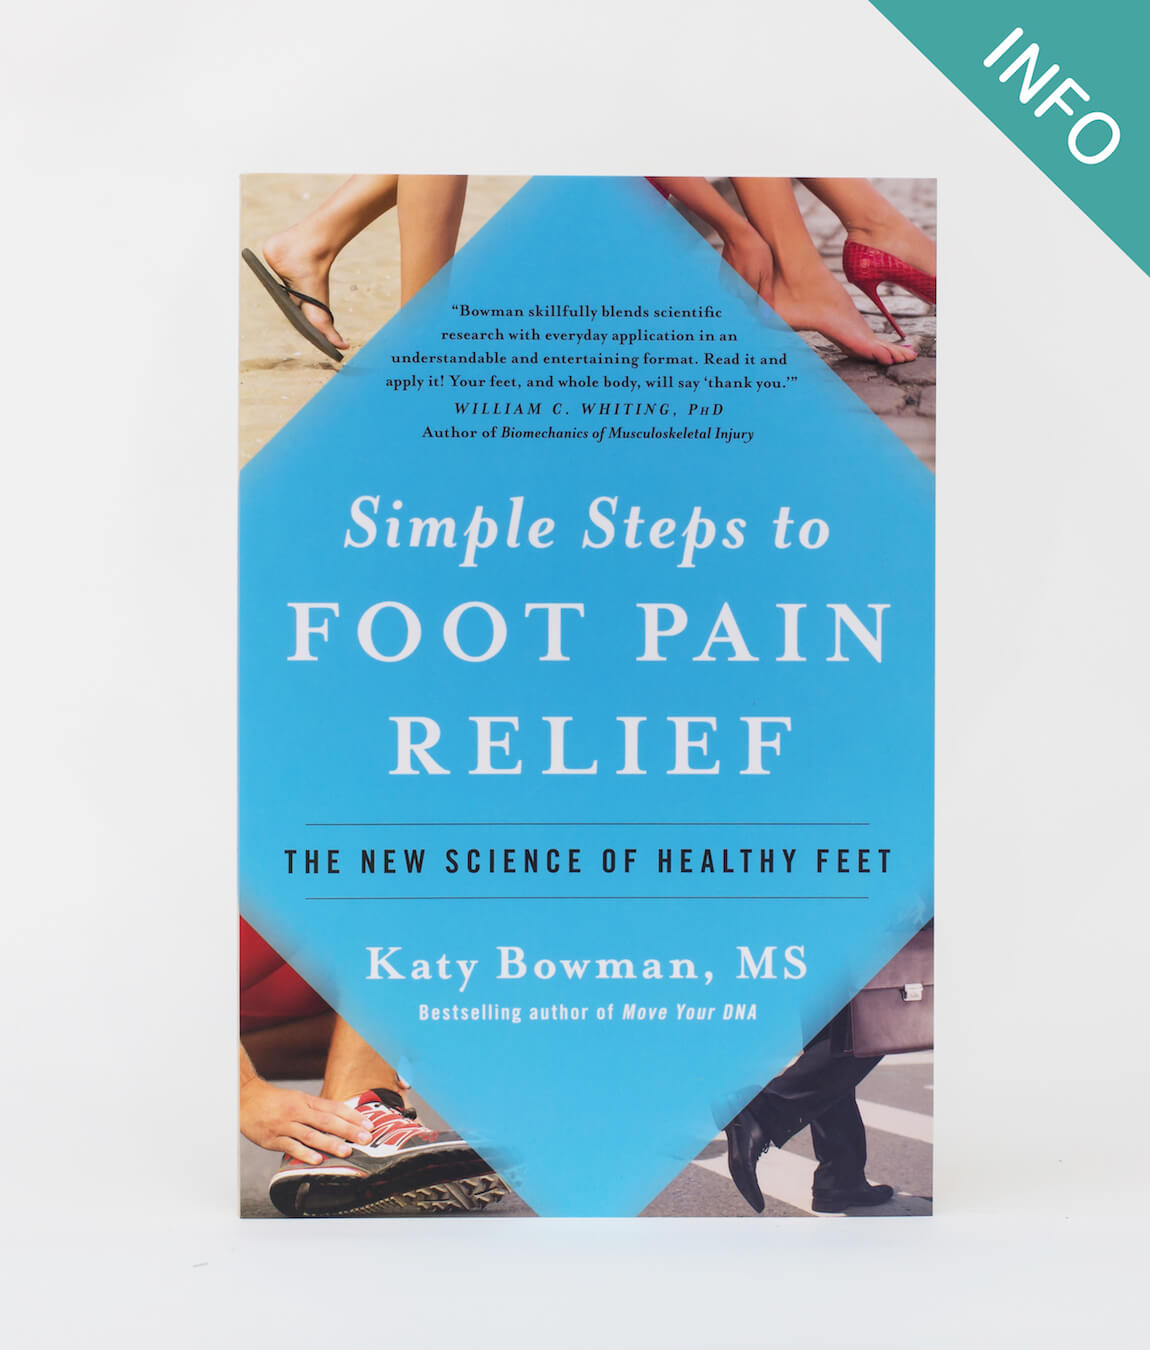 Simple Steps to Foot Pain Relief Katy Bowman